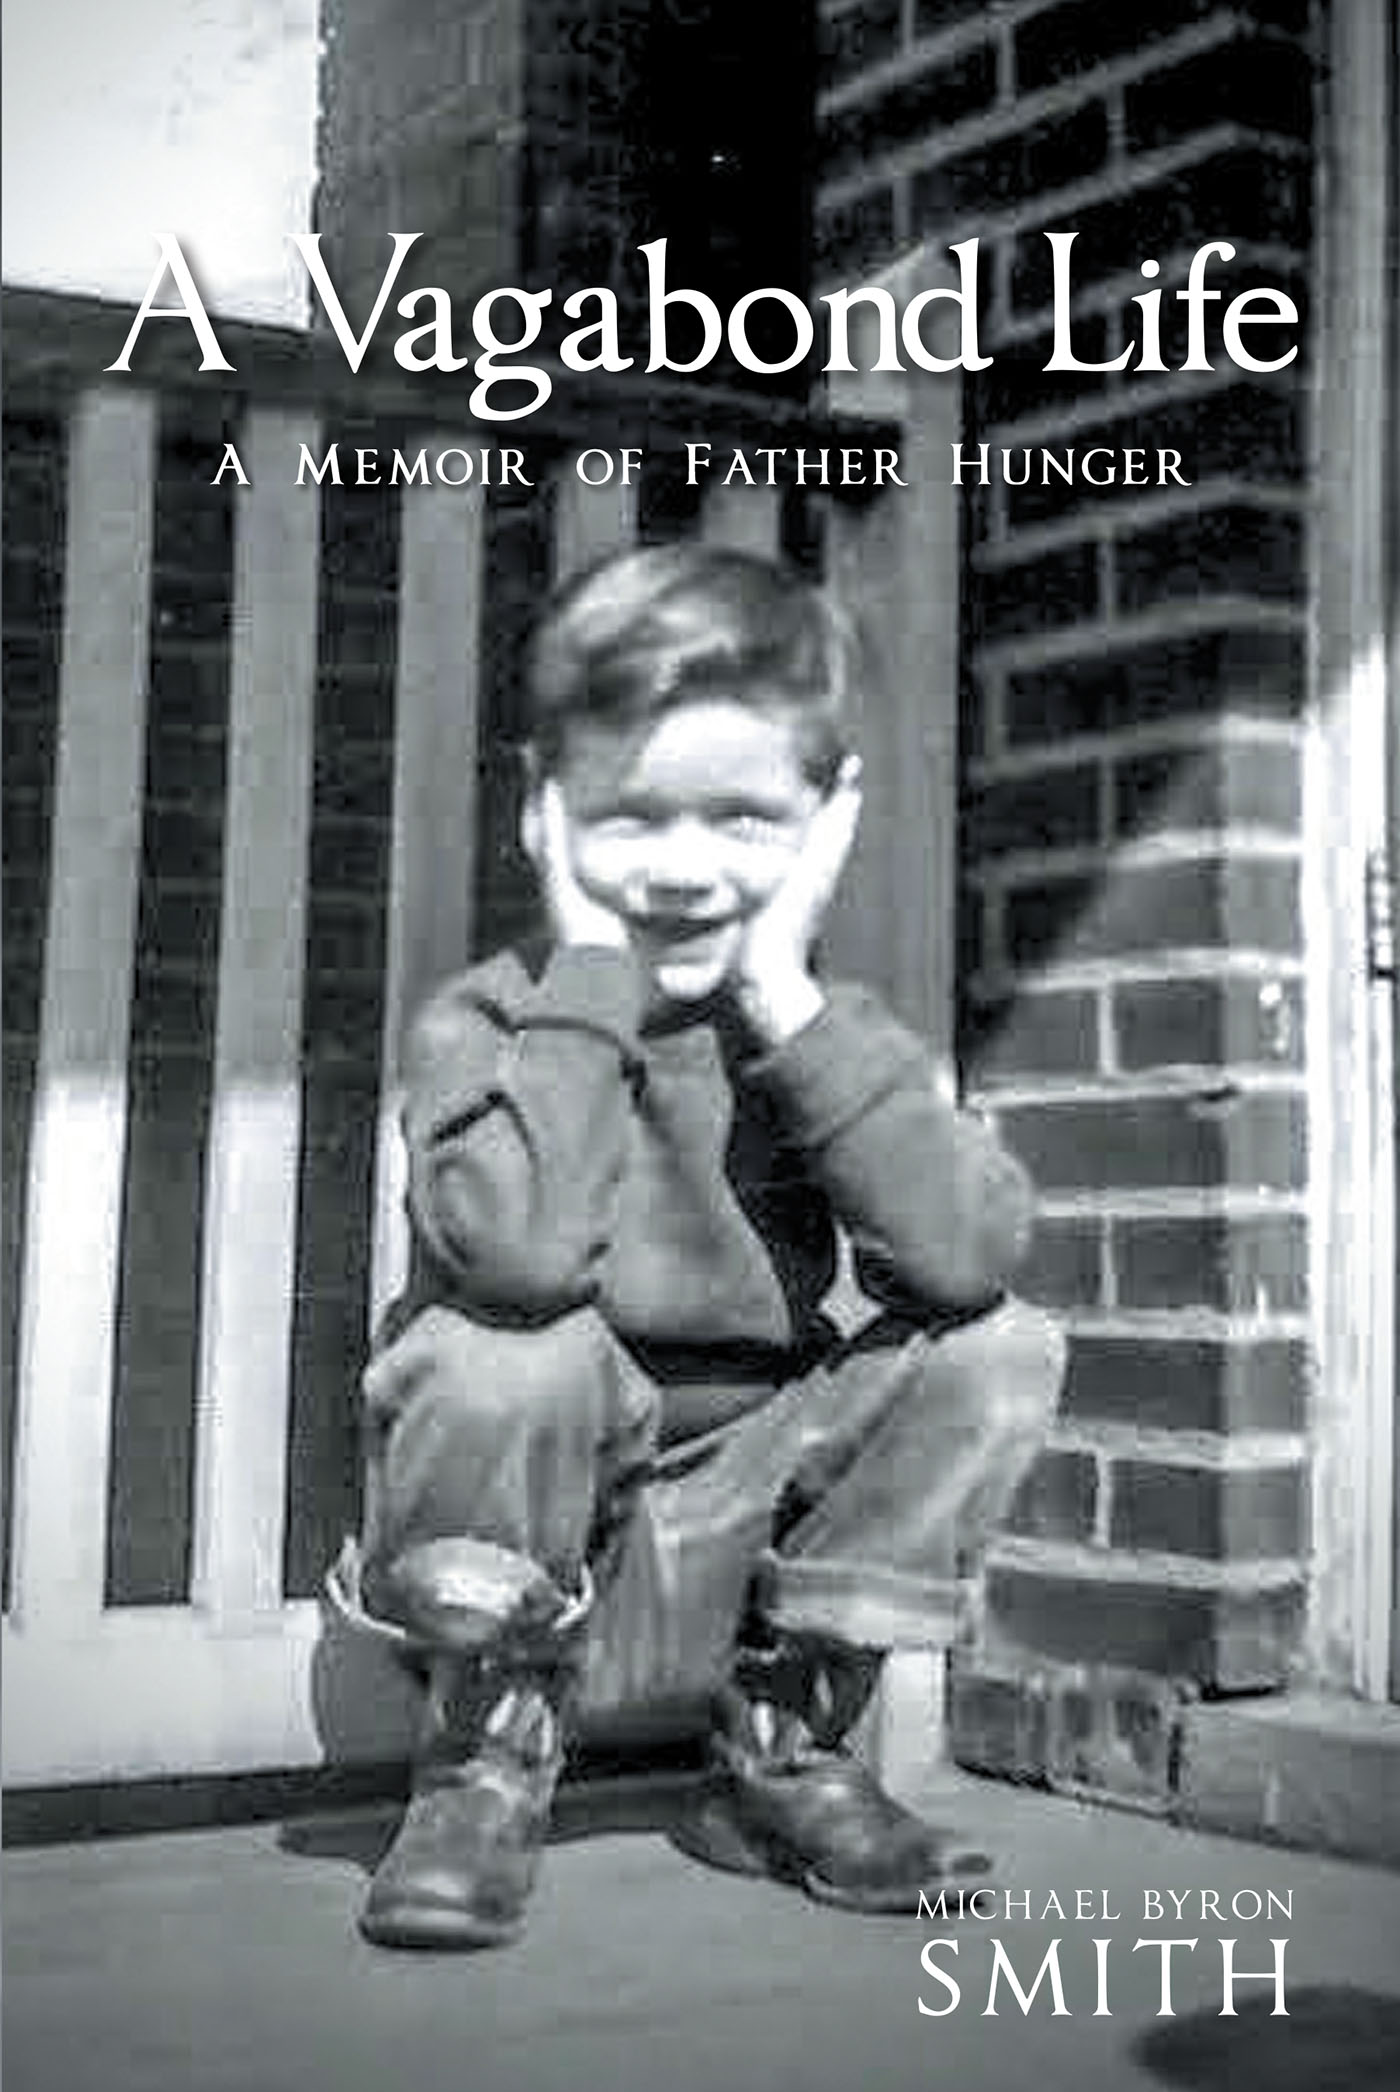 Author Michael Byron Smith’s New Book, “A Vagabond Life: A Memoir of Father Hunger,” Follows the Author’s Upbringing While Lacking a Caring and Nurturing Father